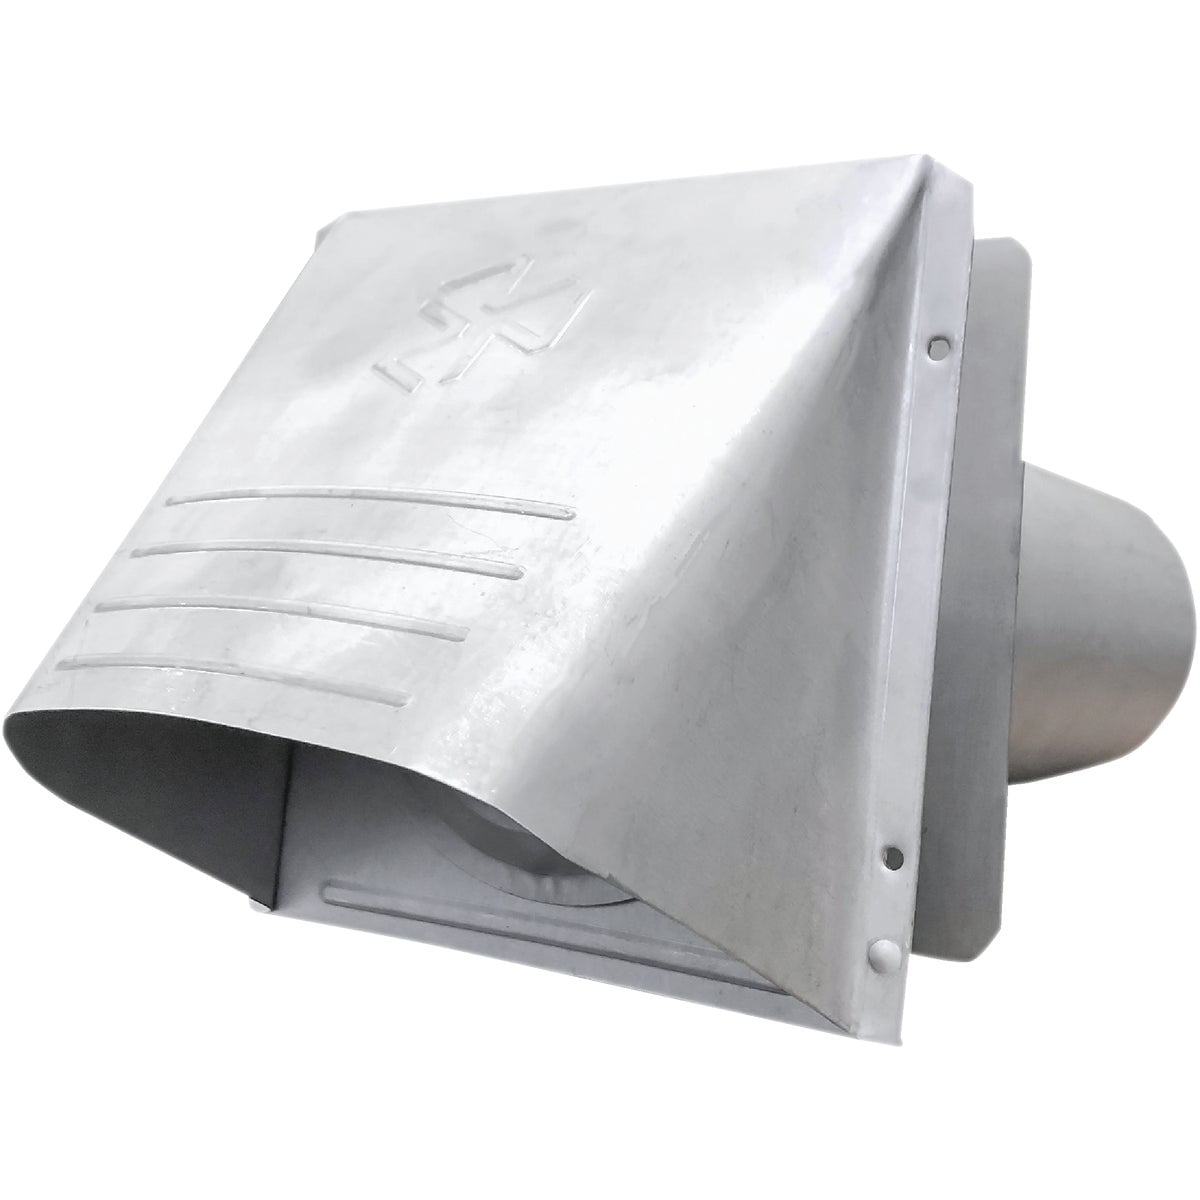 Details about   New DEFLECTO 4" DRYER VENT HOOD Weather-Resistant Wide Mouth Removable Guard 